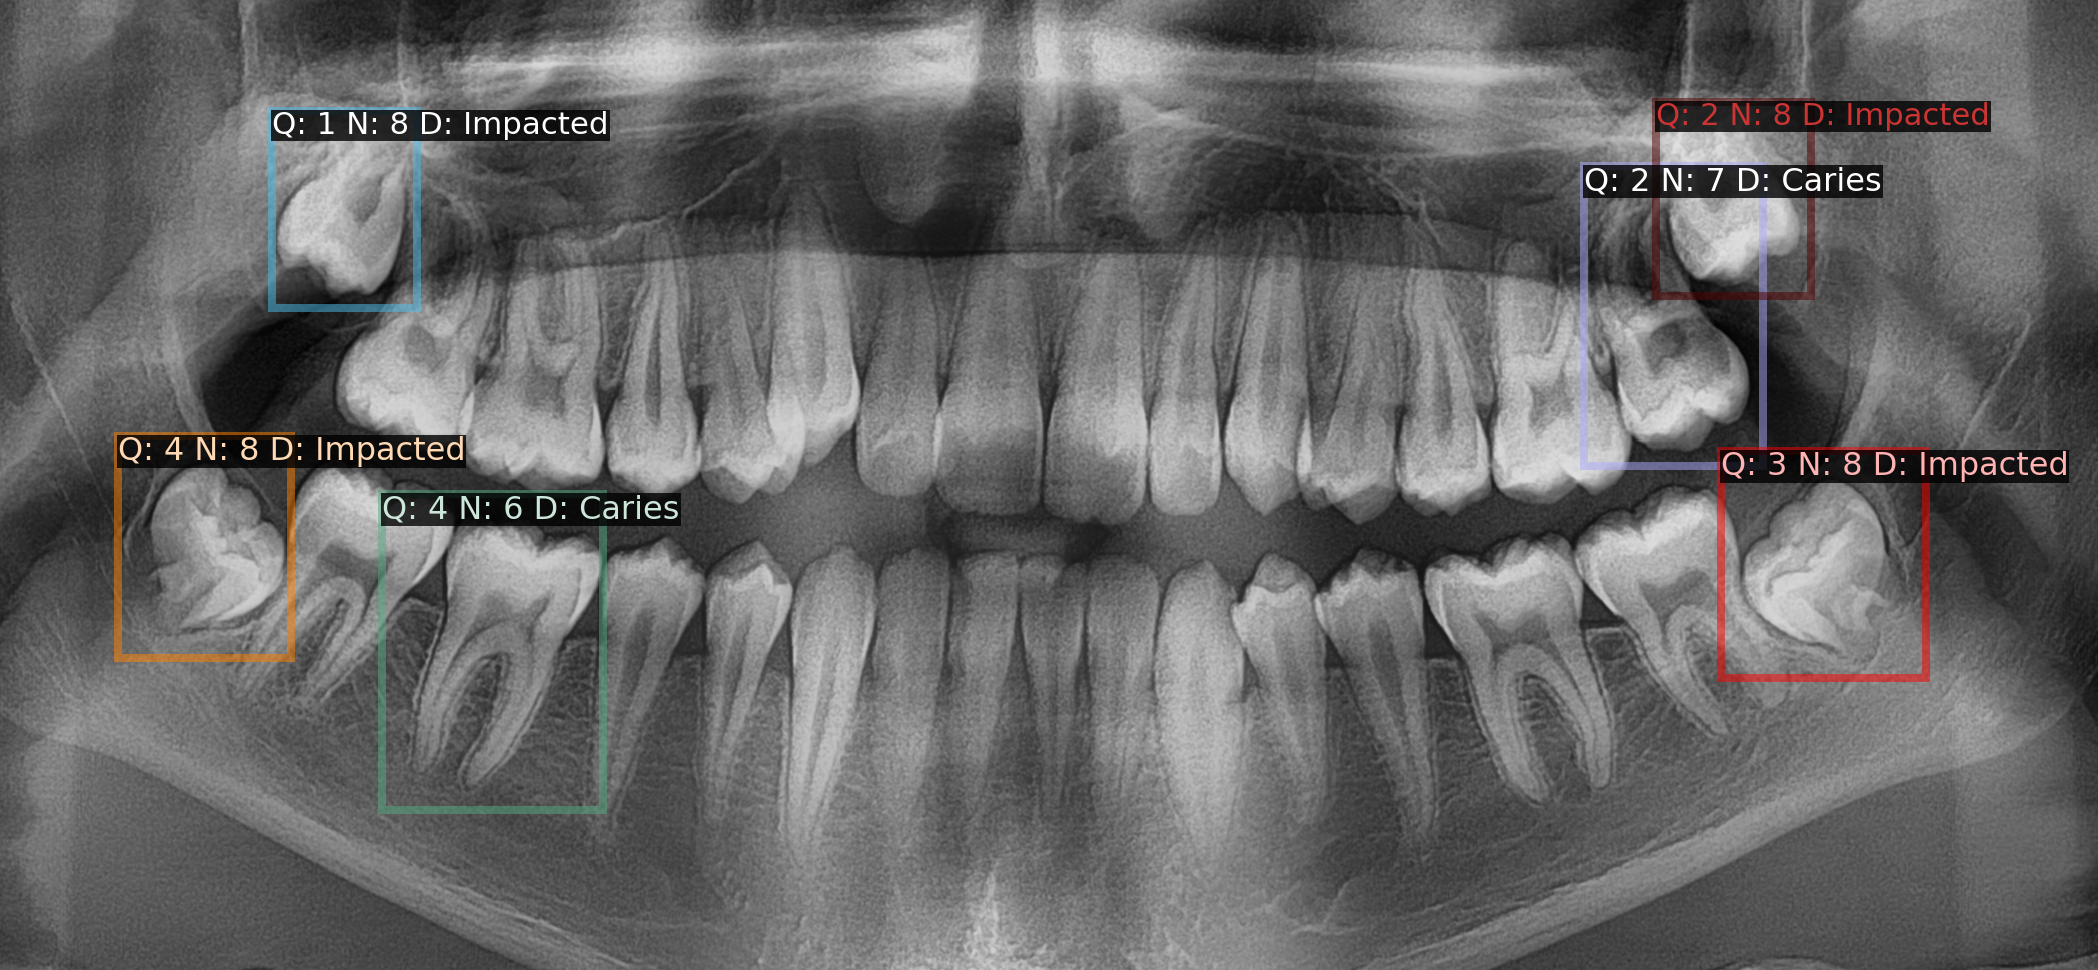 Output from our final model showing well-defined boxes for diseased teeth with corresponding quadrant (Q), enumeration (N), and diagnosis (D) labels., etc.